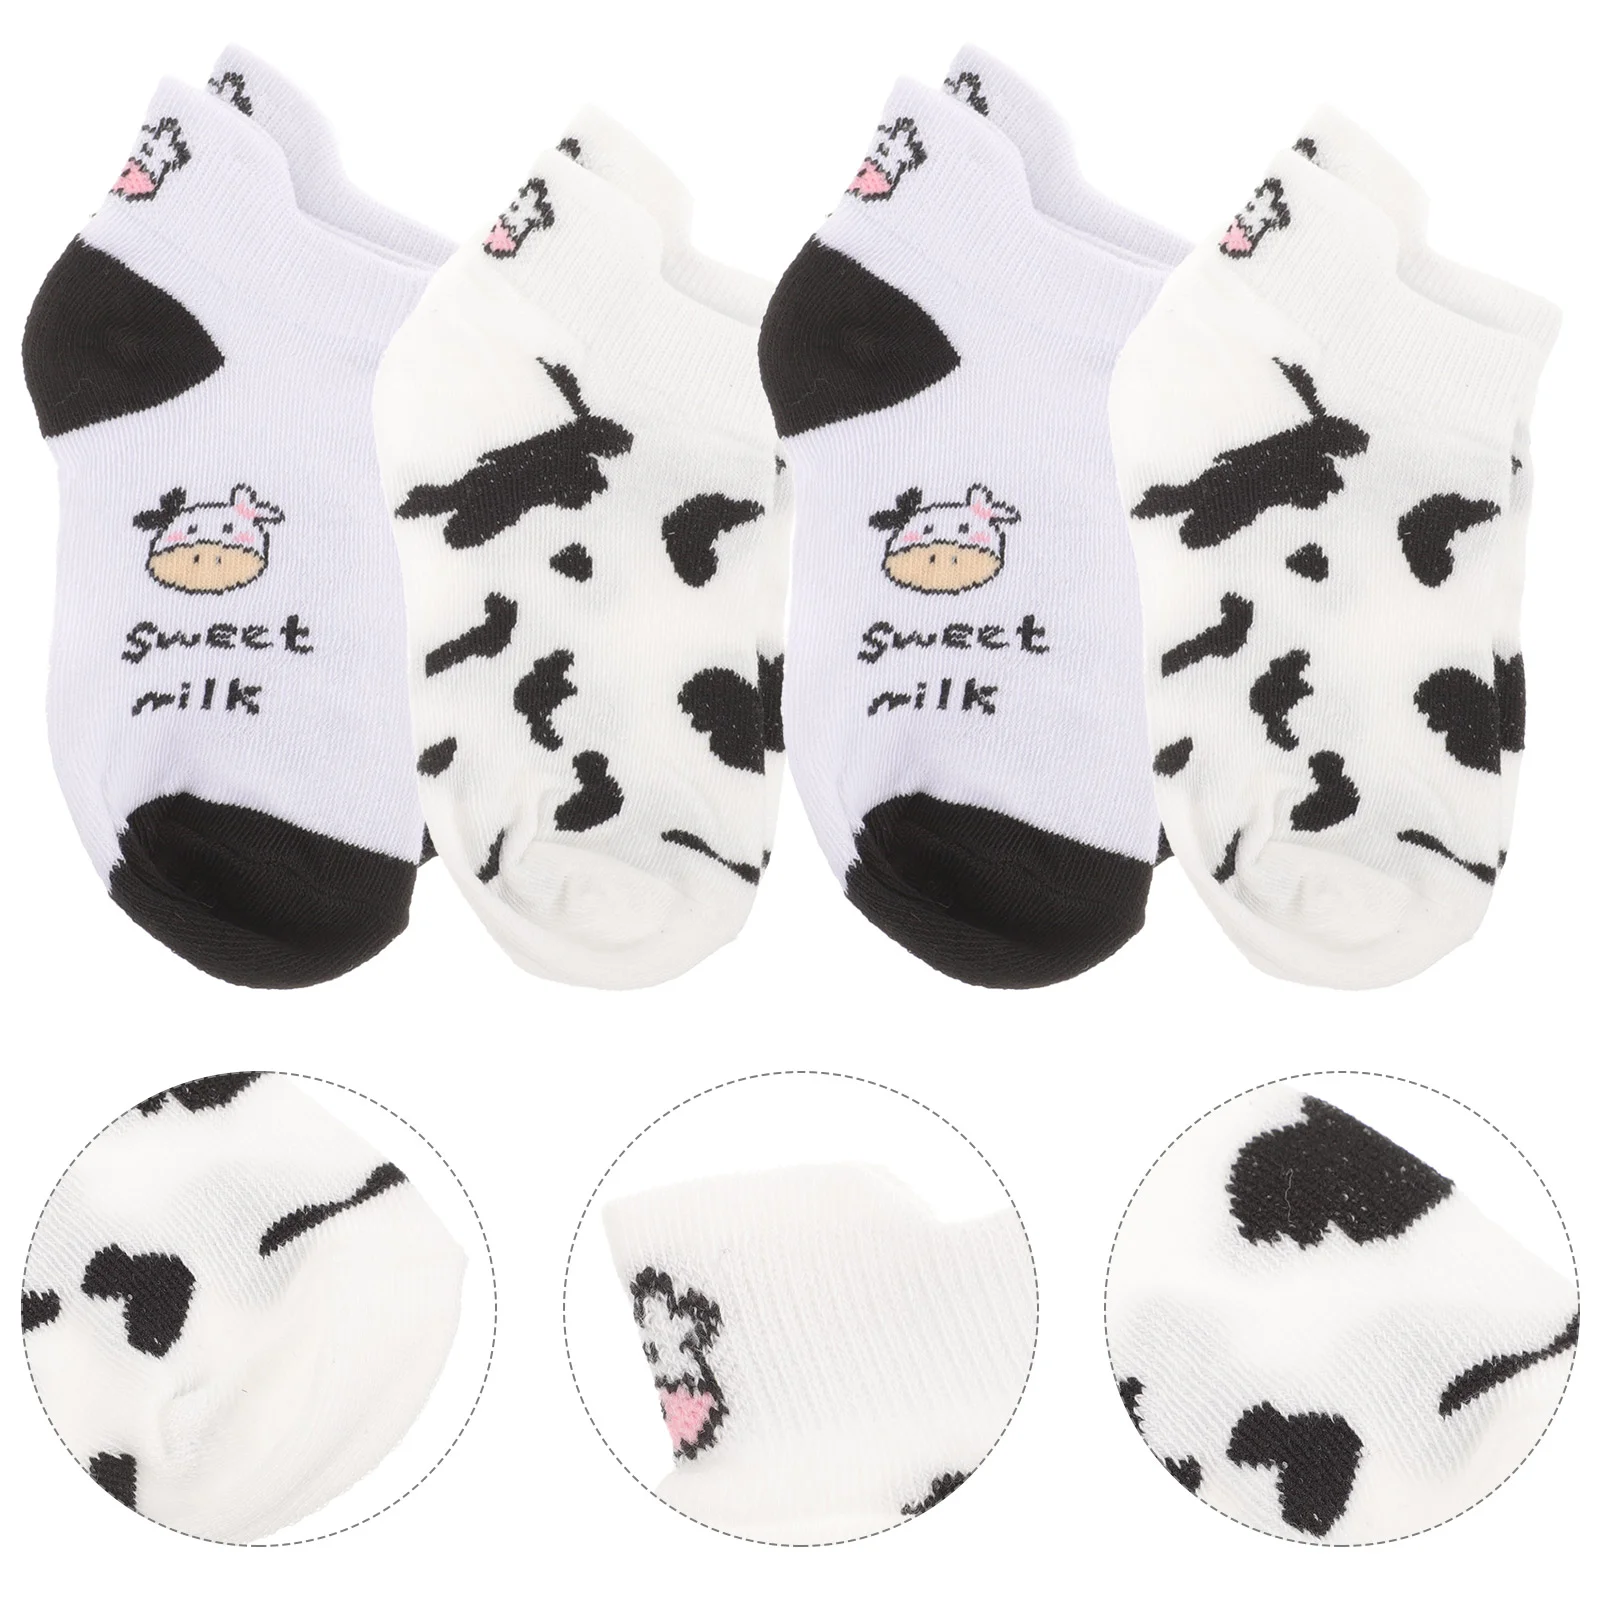 

4 Pairs Cow Socks Black for Women Embroidery Short Pattern Girls Anklet Boat Cotton Adorable Miss